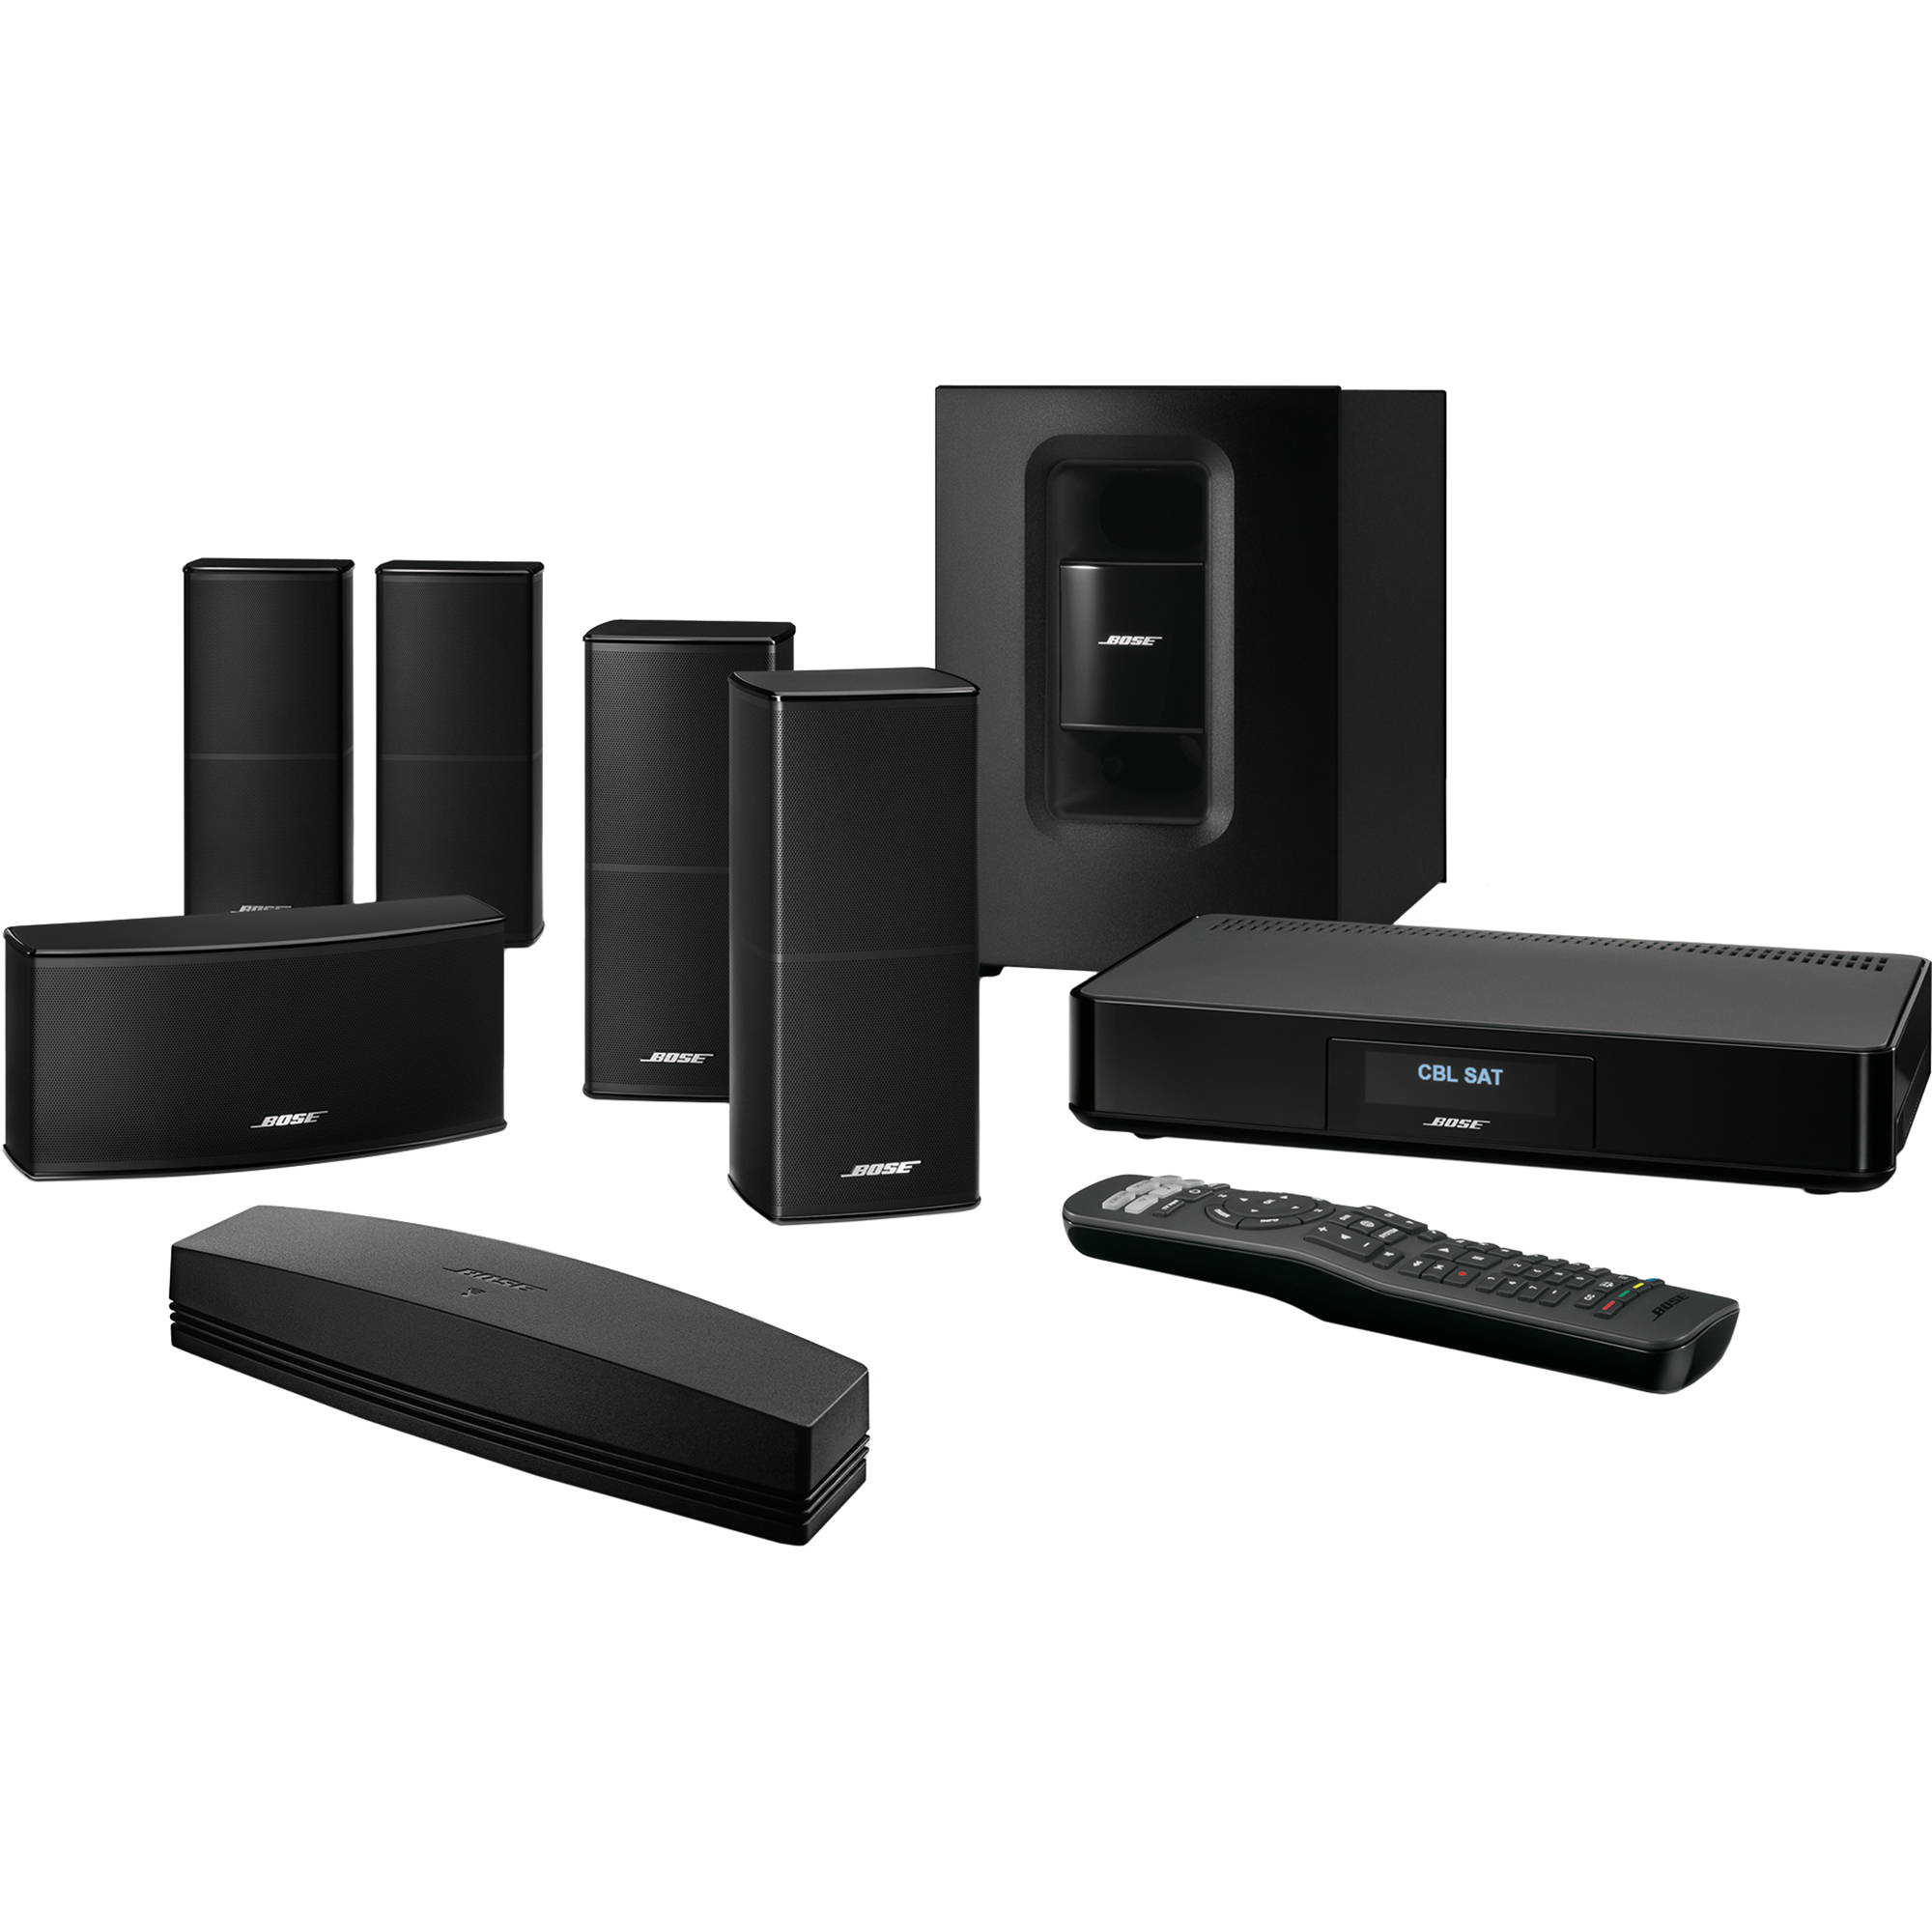 Bose SoundTouch 520 Home Theater System 